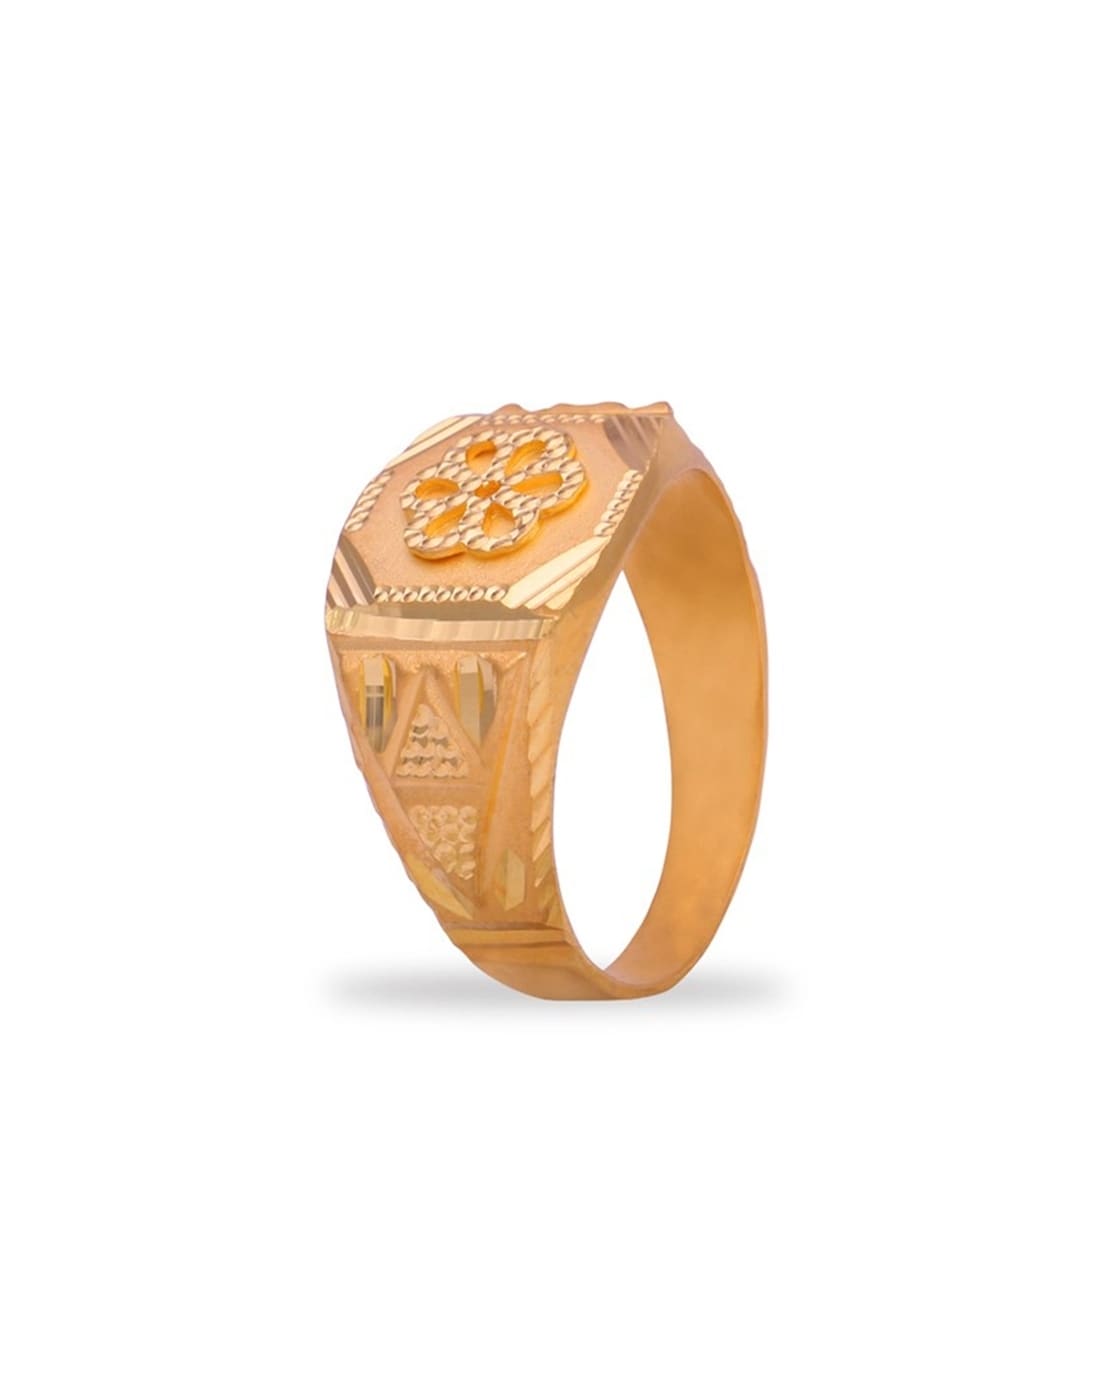 Buy WHP Classic Yellow Gold Ring For Women & Men, 22KT (916) BIS Hallmark  Pure Gold, Gold Jewellery, Couple Rings For Men & Women, Couple Bands  Suitable For Gifting at Amazon.in